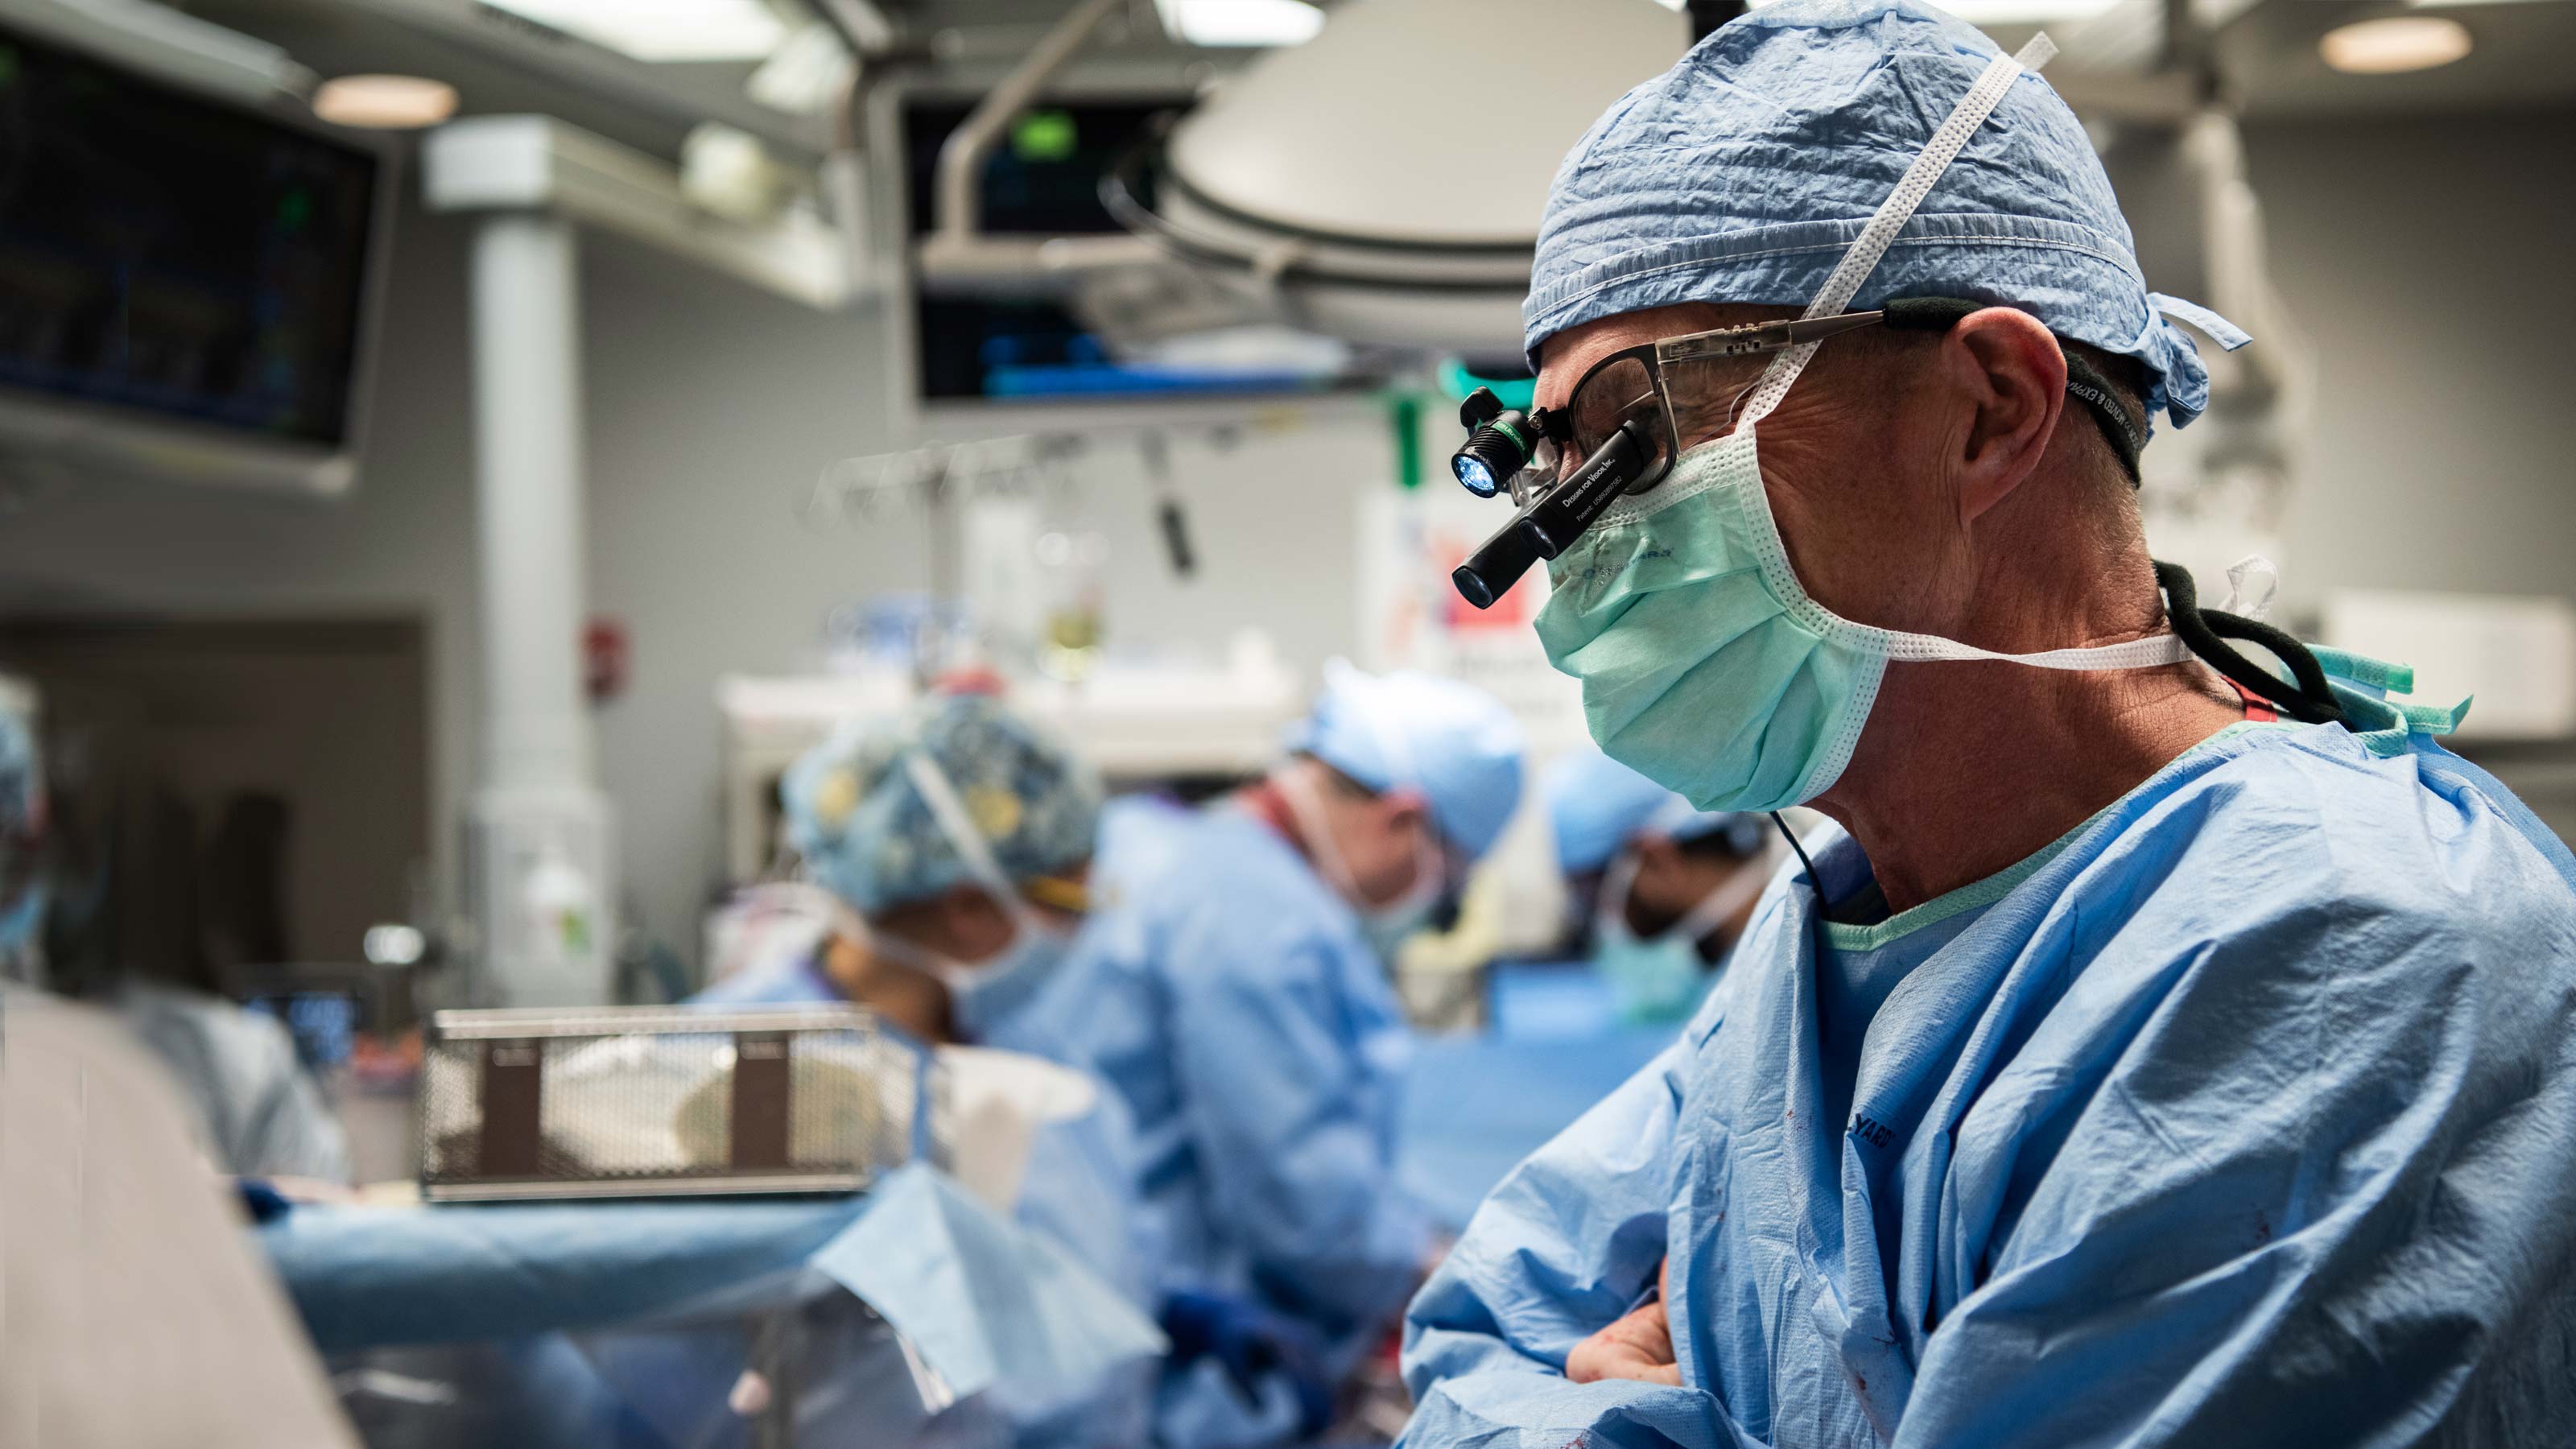 With thousands awaiting organ transplants, Ohio State surgeon is expanding organ availability to save more lives